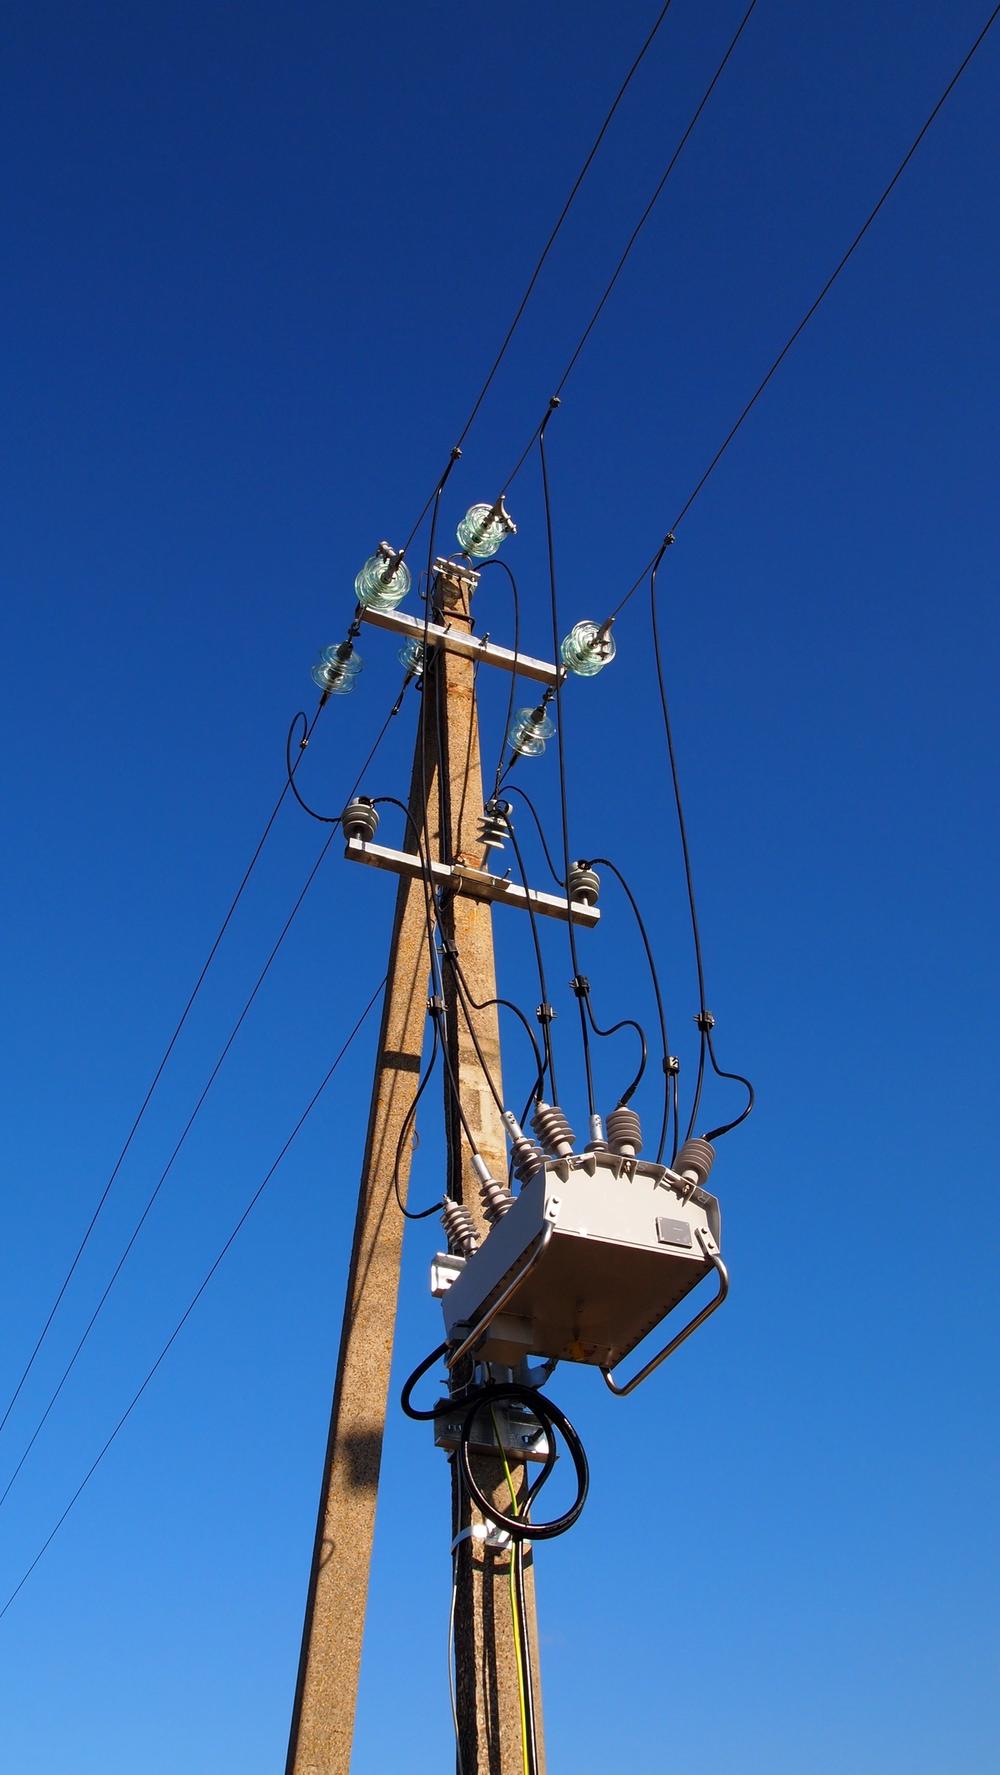 Pole mounted NOJA Power OSM38 Recloser in Lithuania taken from below with clear blue skies